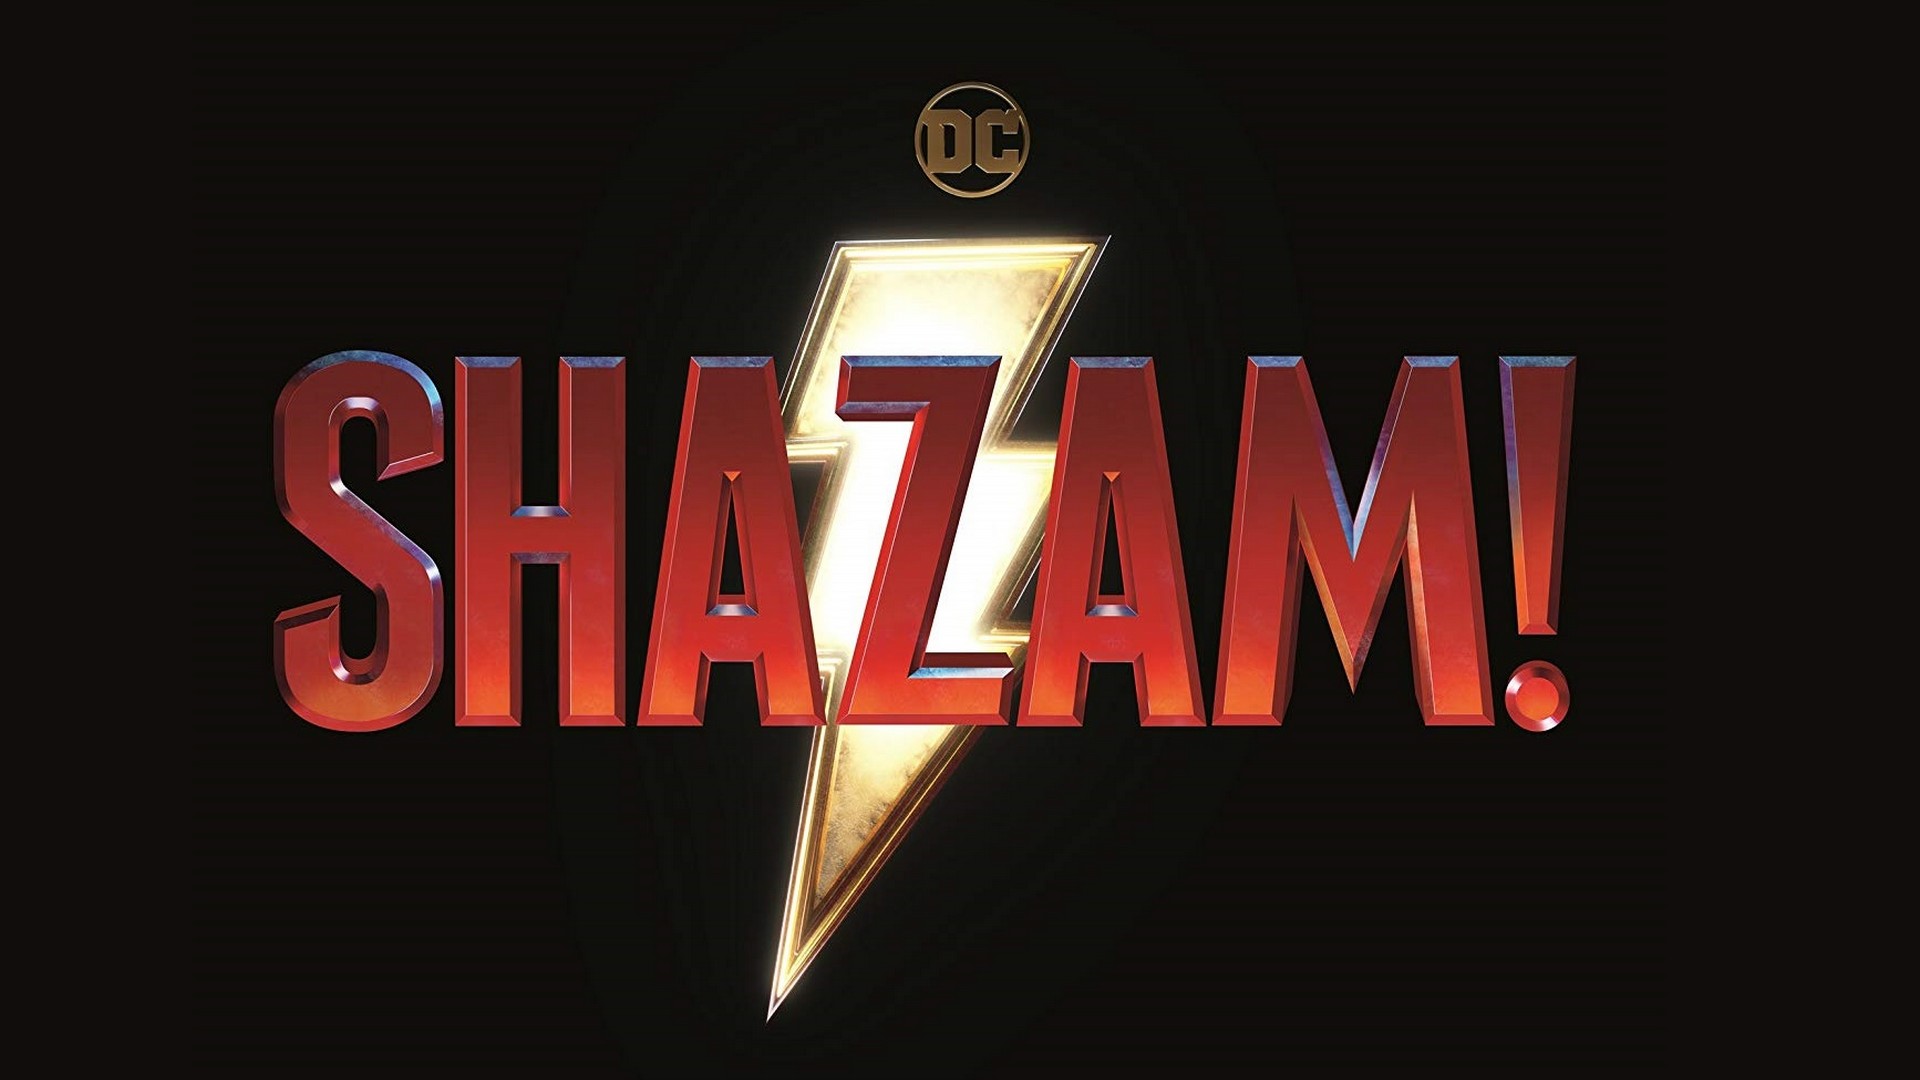 Shazam! 2019 Wallpaper with high-resolution 1920x1080 pixel. You can use this poster wallpaper for your Desktop Computers, Mac Screensavers, Windows Backgrounds, iPhone Wallpapers, Tablet or Android Lock screen and another Mobile device